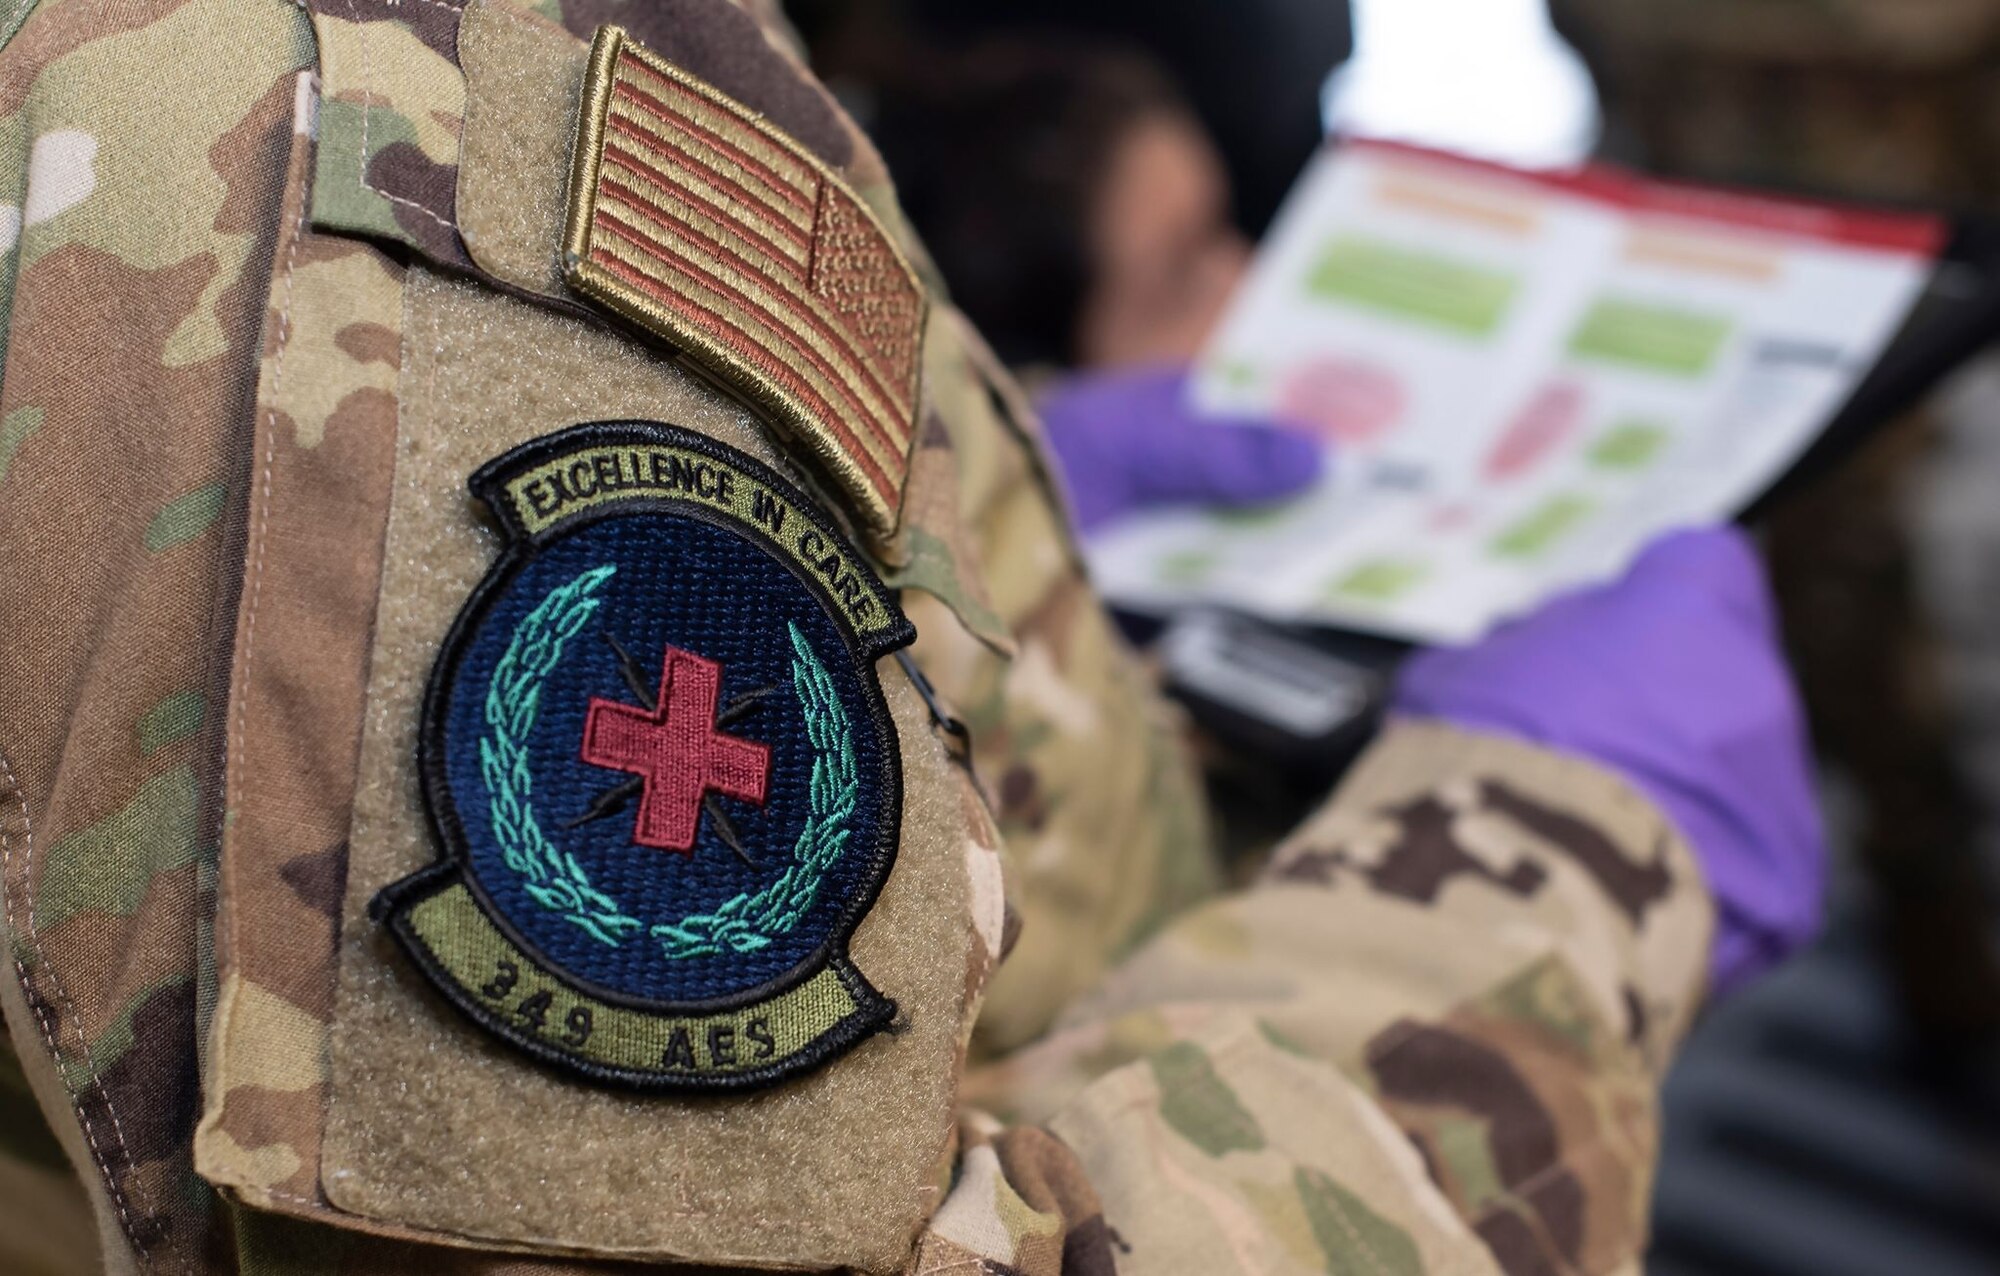 The sleeve of a military person's combat uniform has the squadron patch of the 349th Aeromedical Evacuation Squadron on it. Its motto, "Excellence in Care," is emblazoned at the top.